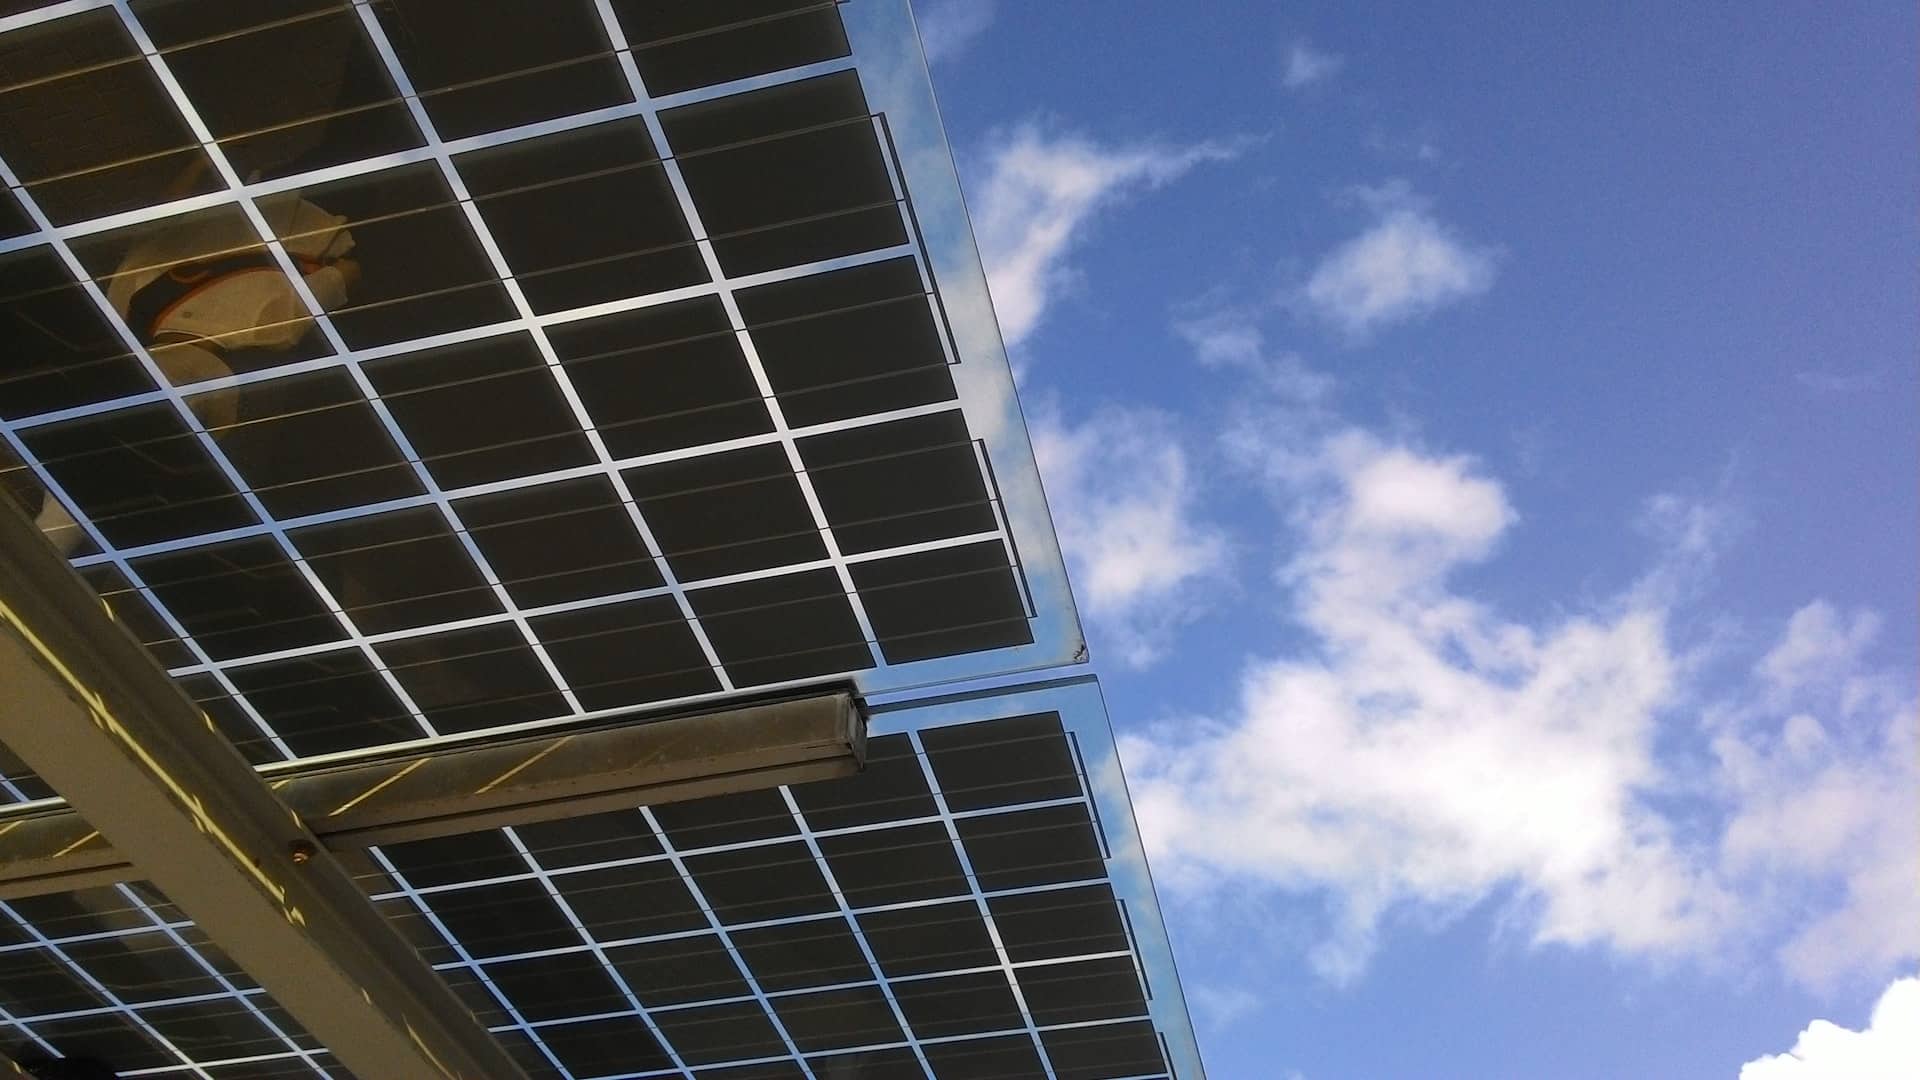 Sunny days are ideal for solar panel production